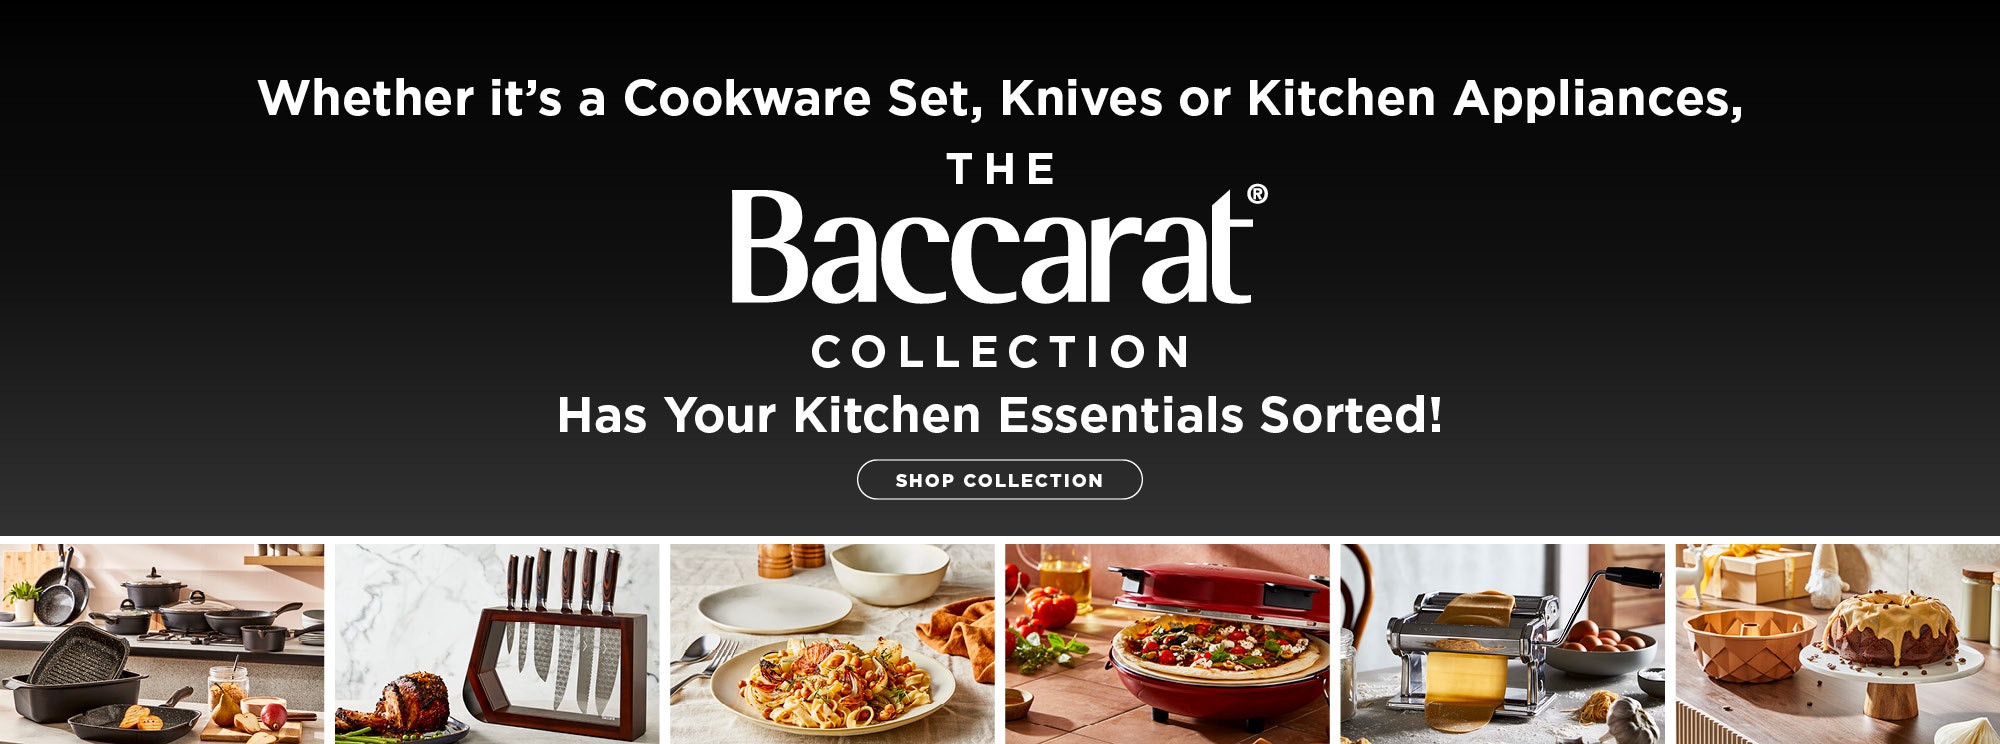 shop the full Baccarat Collection